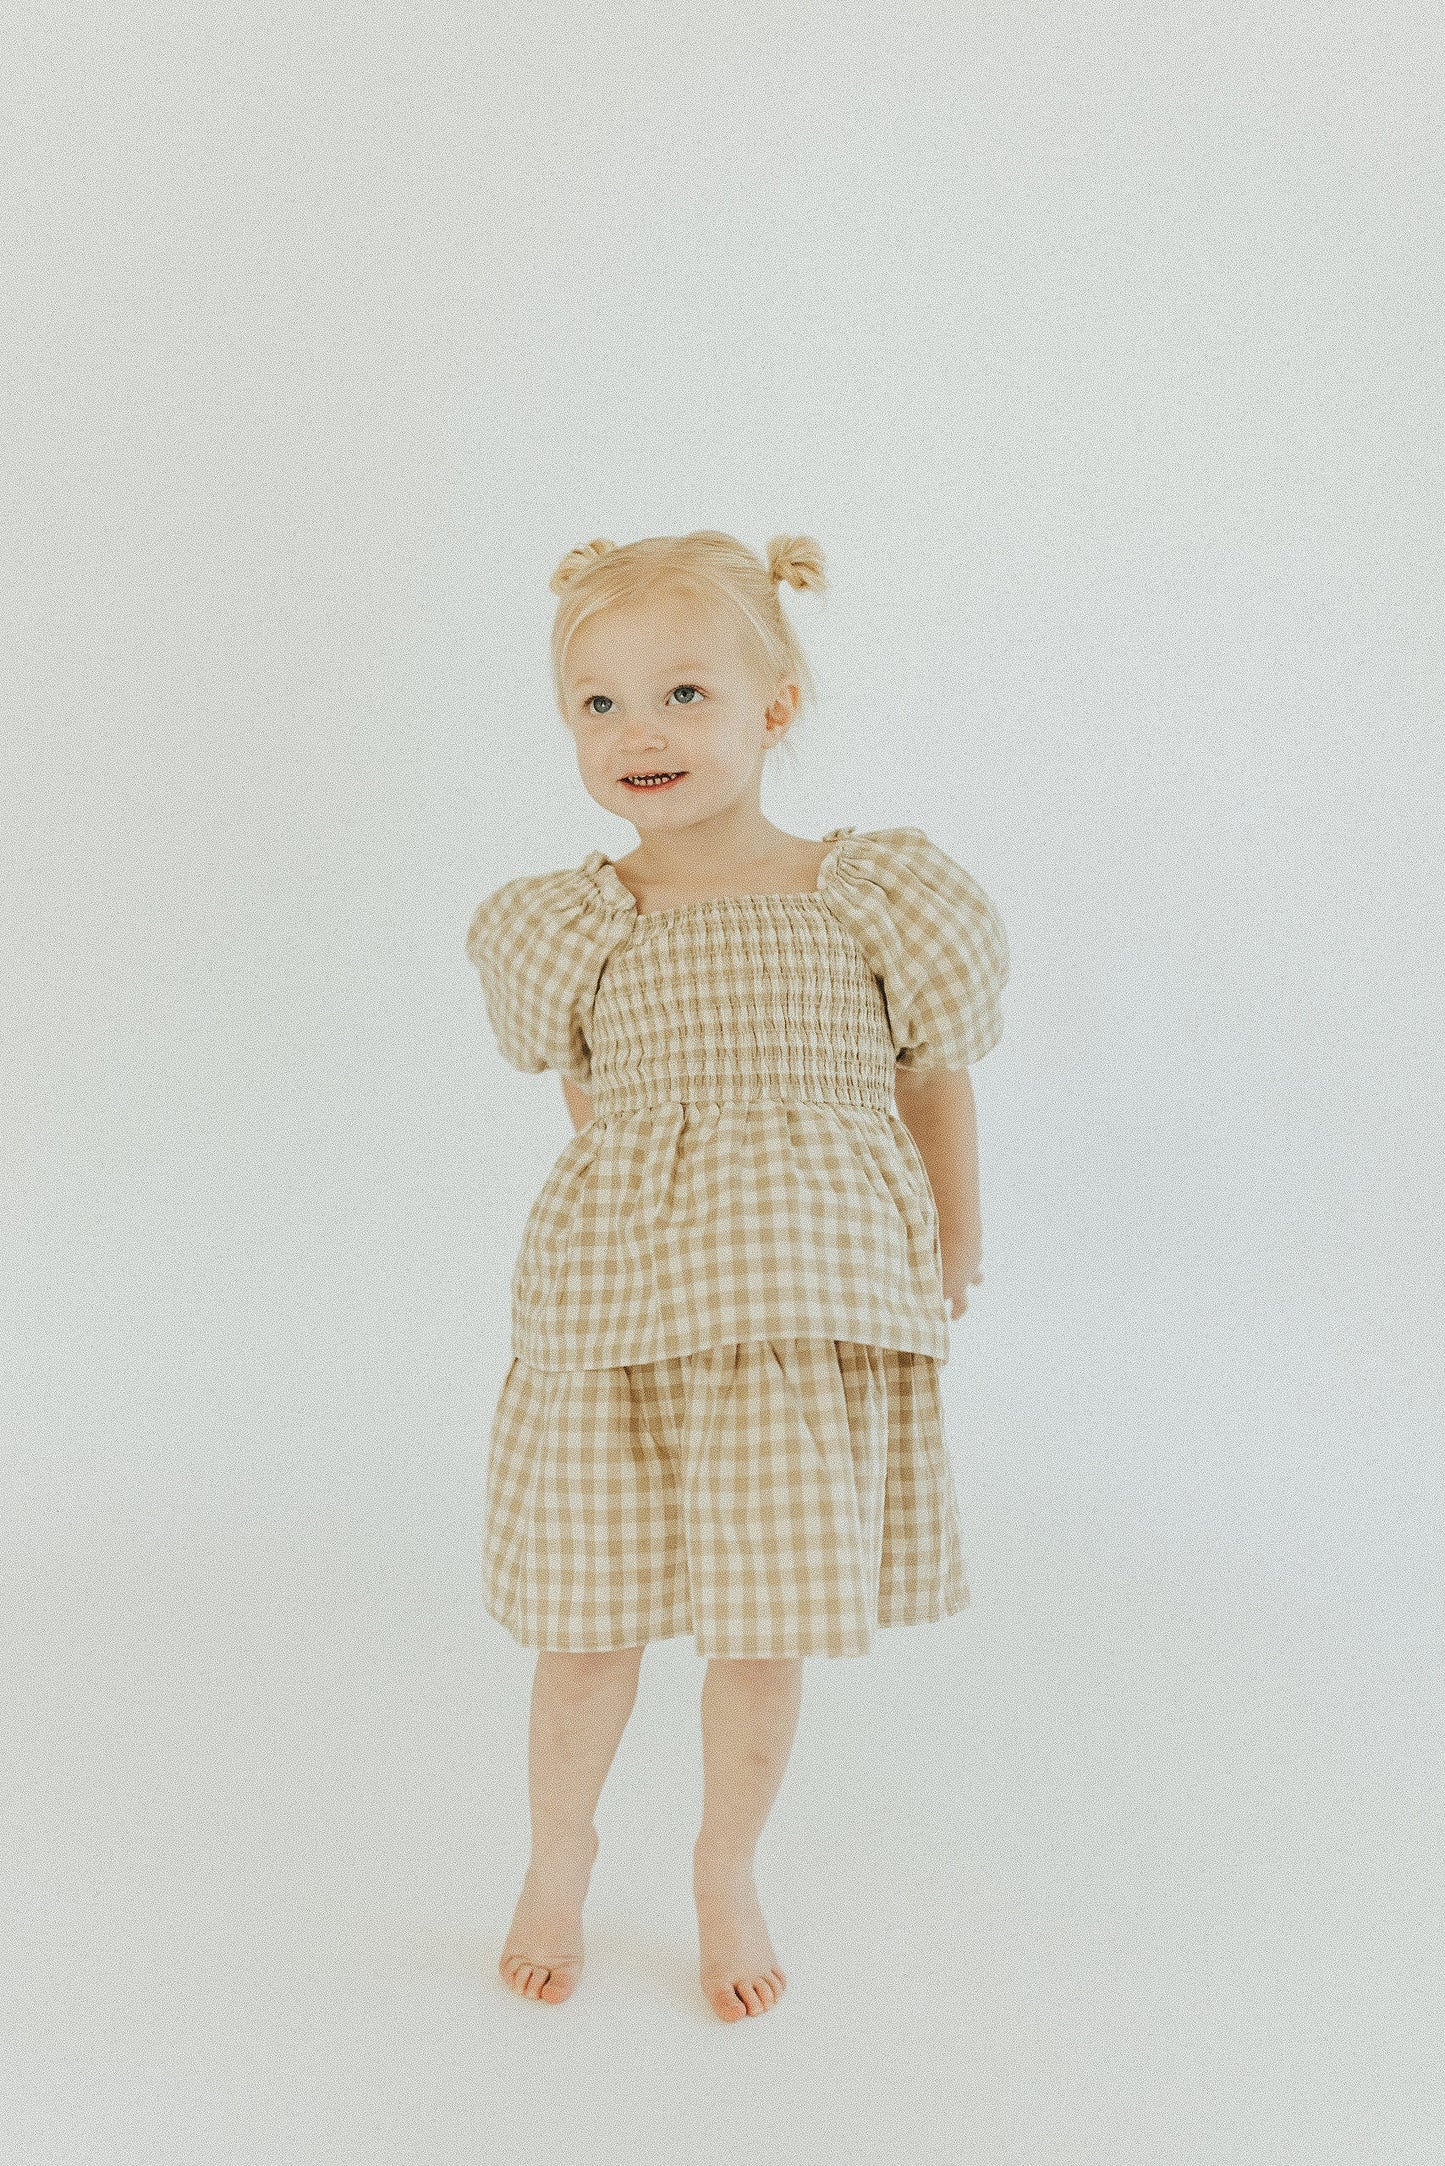 The Millie in Gingham Mini